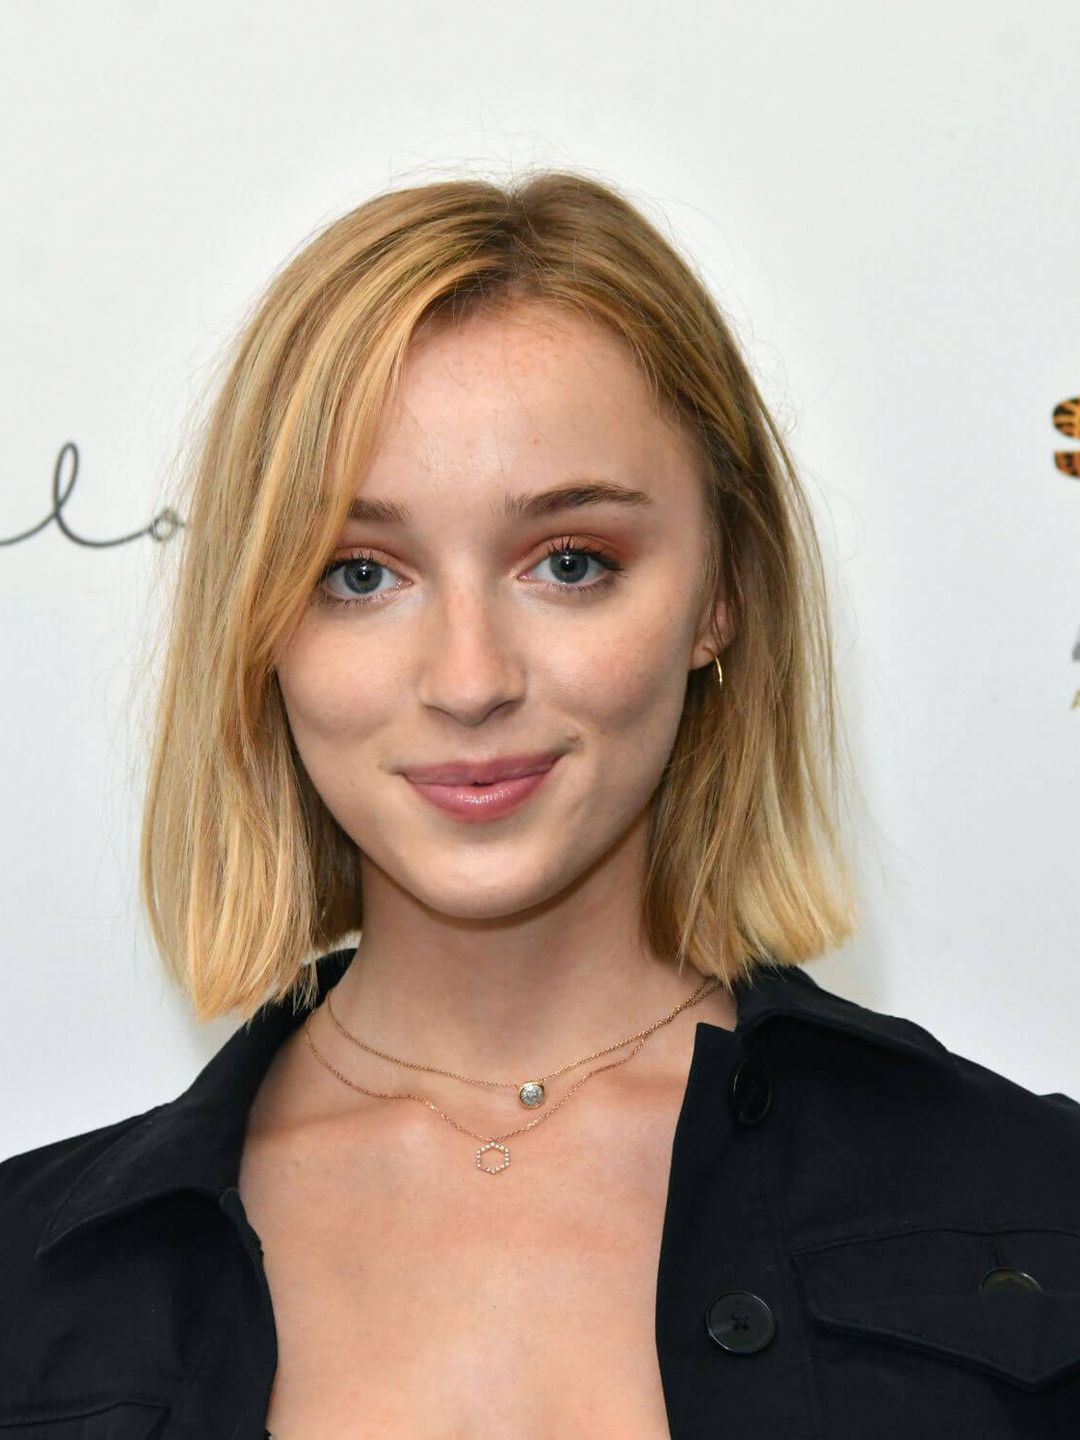 Phoebe Dynevor in her youth